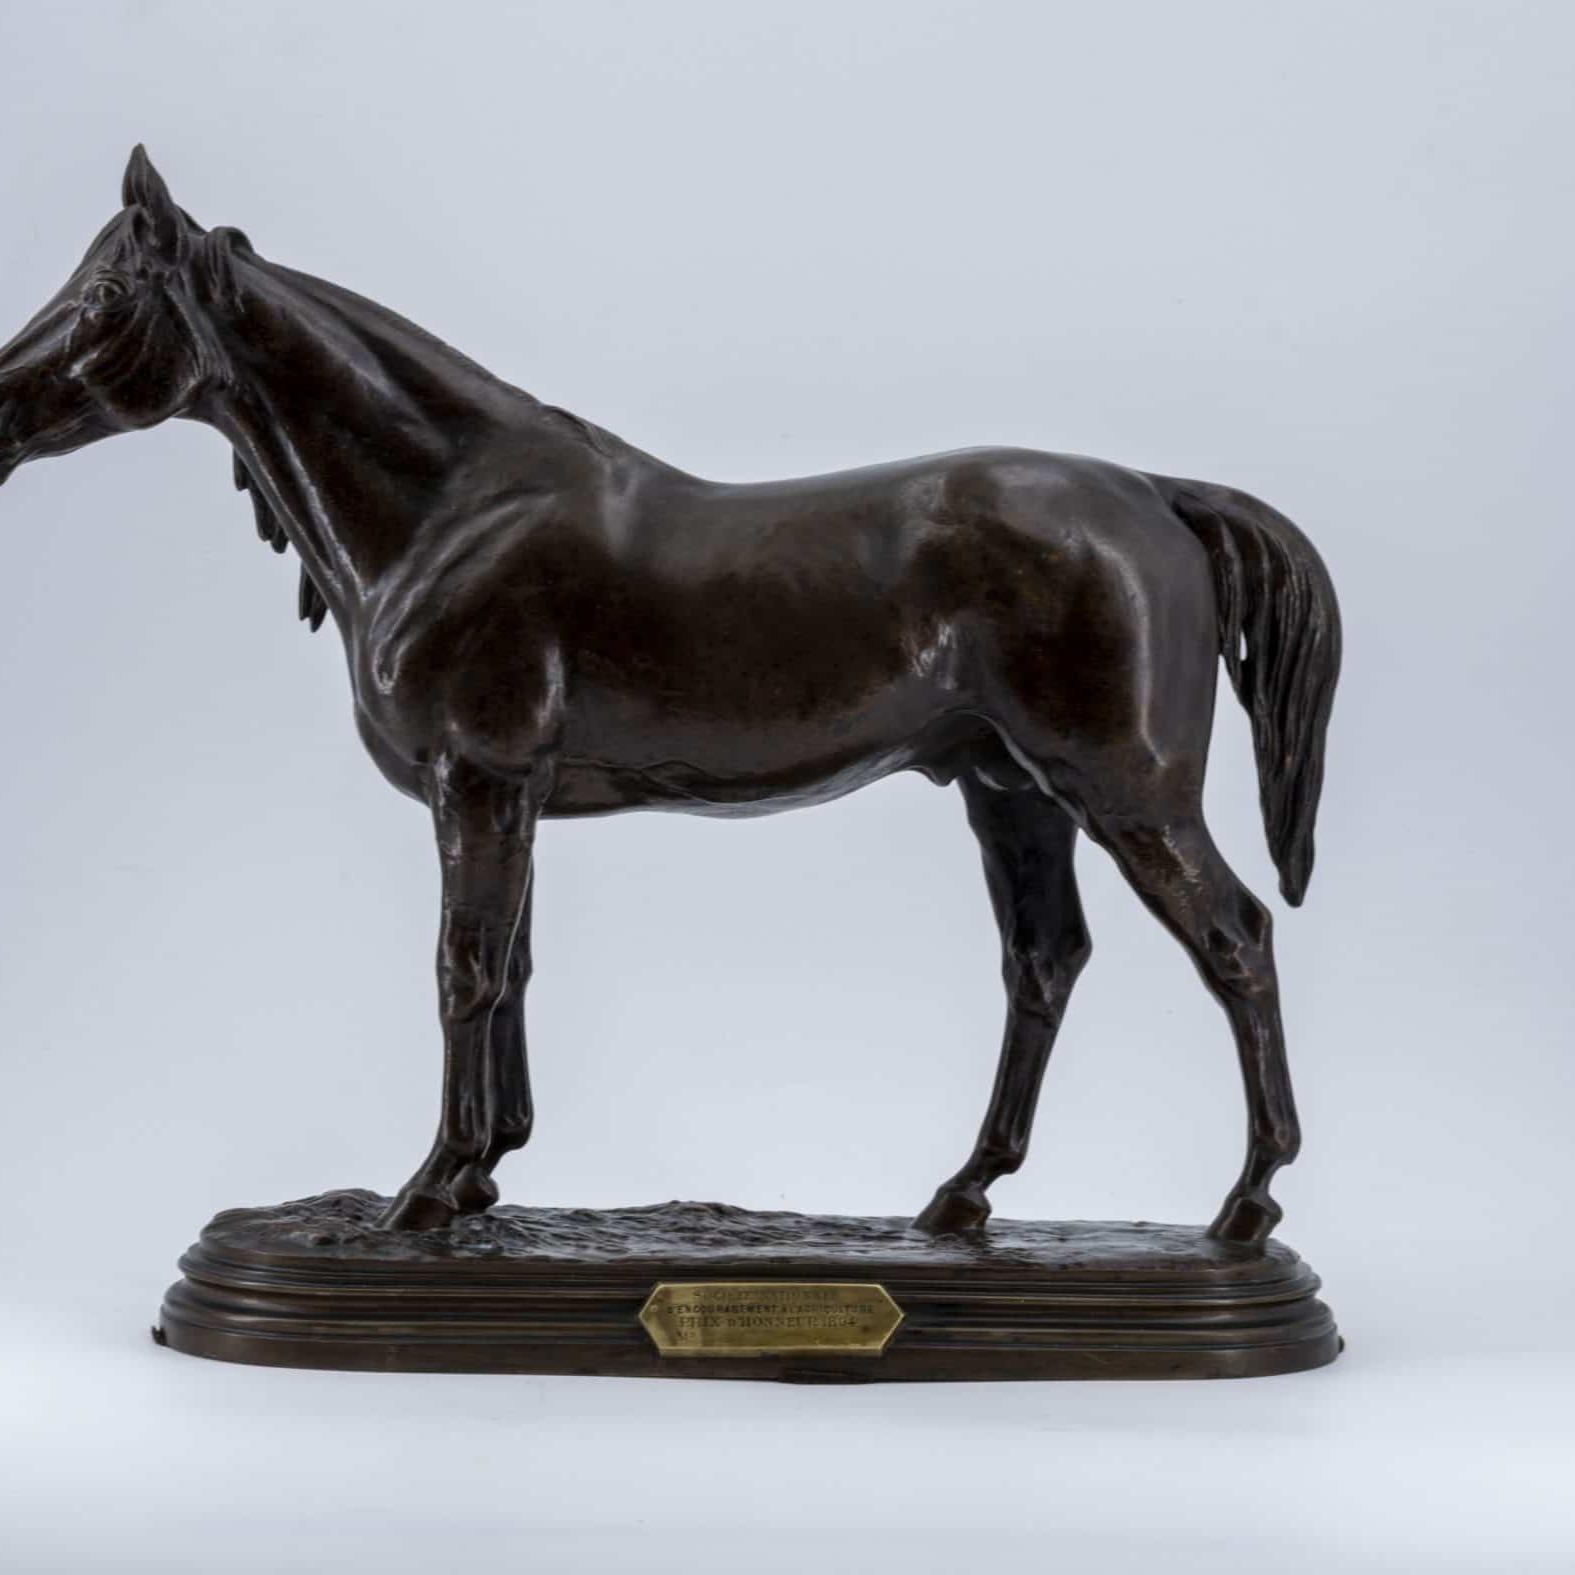 Competition Horse. Bronze by Isodore Bonheur (1827 - 1901)